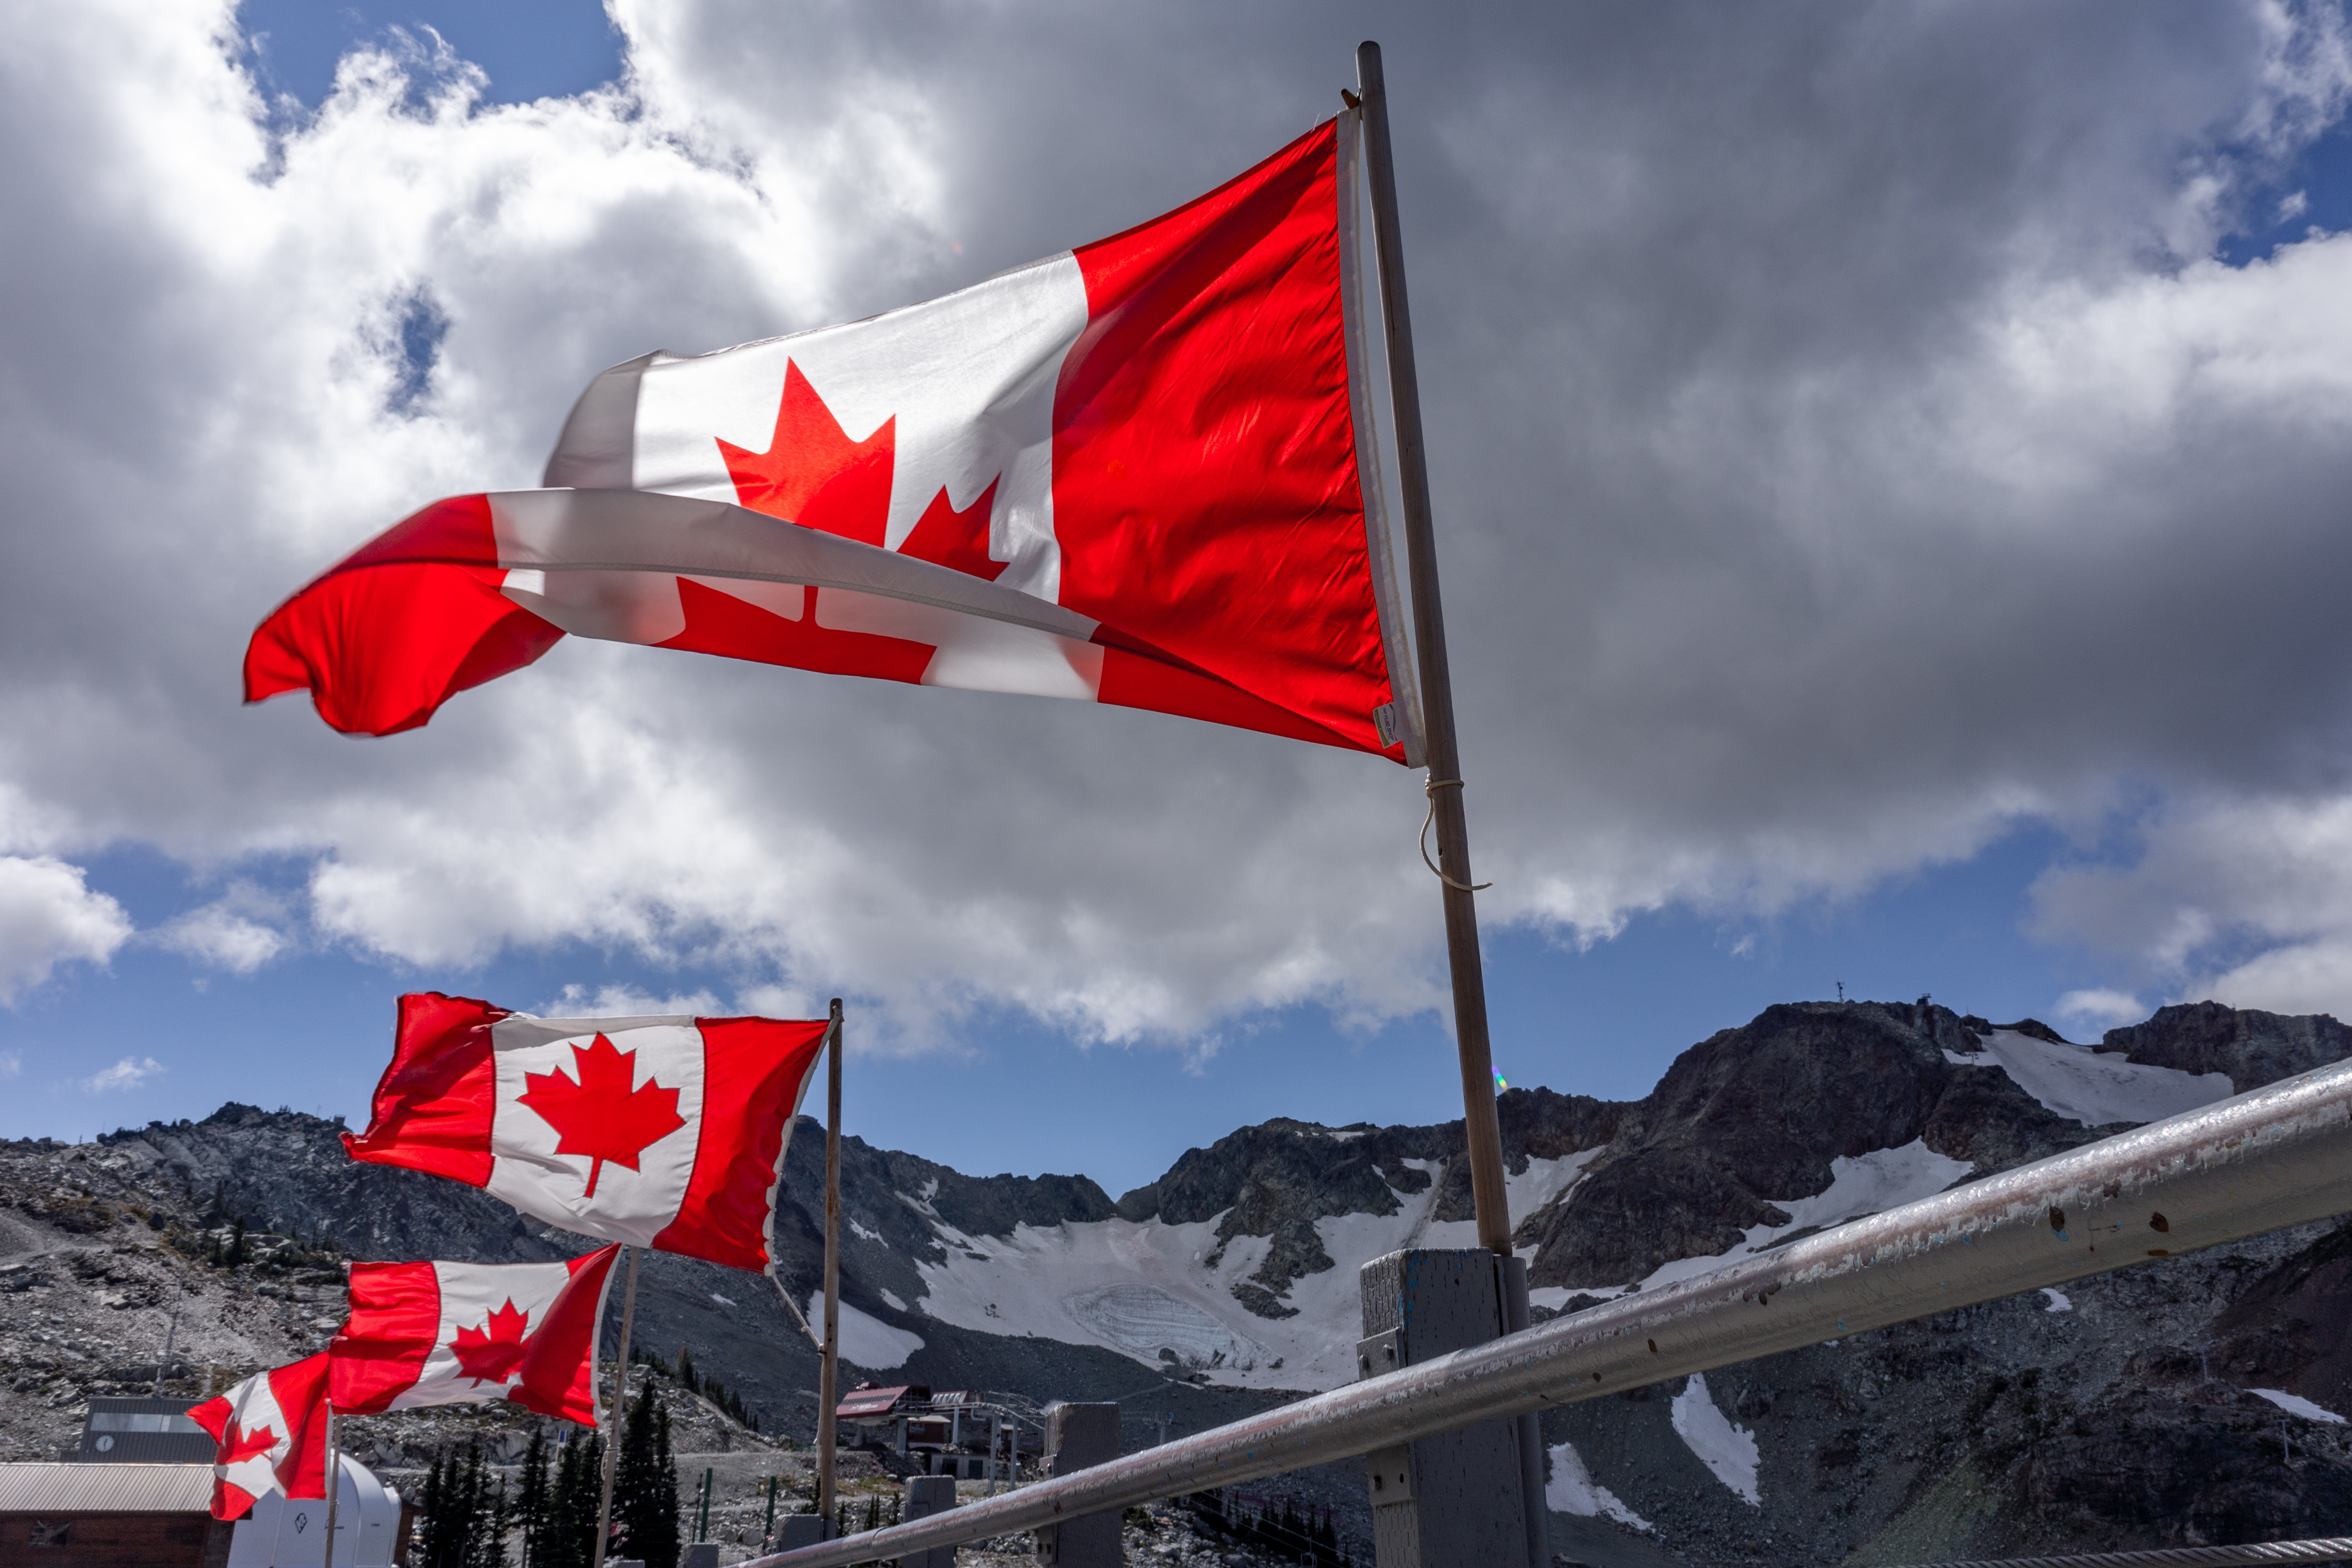 Canadian flags blowing in the wind